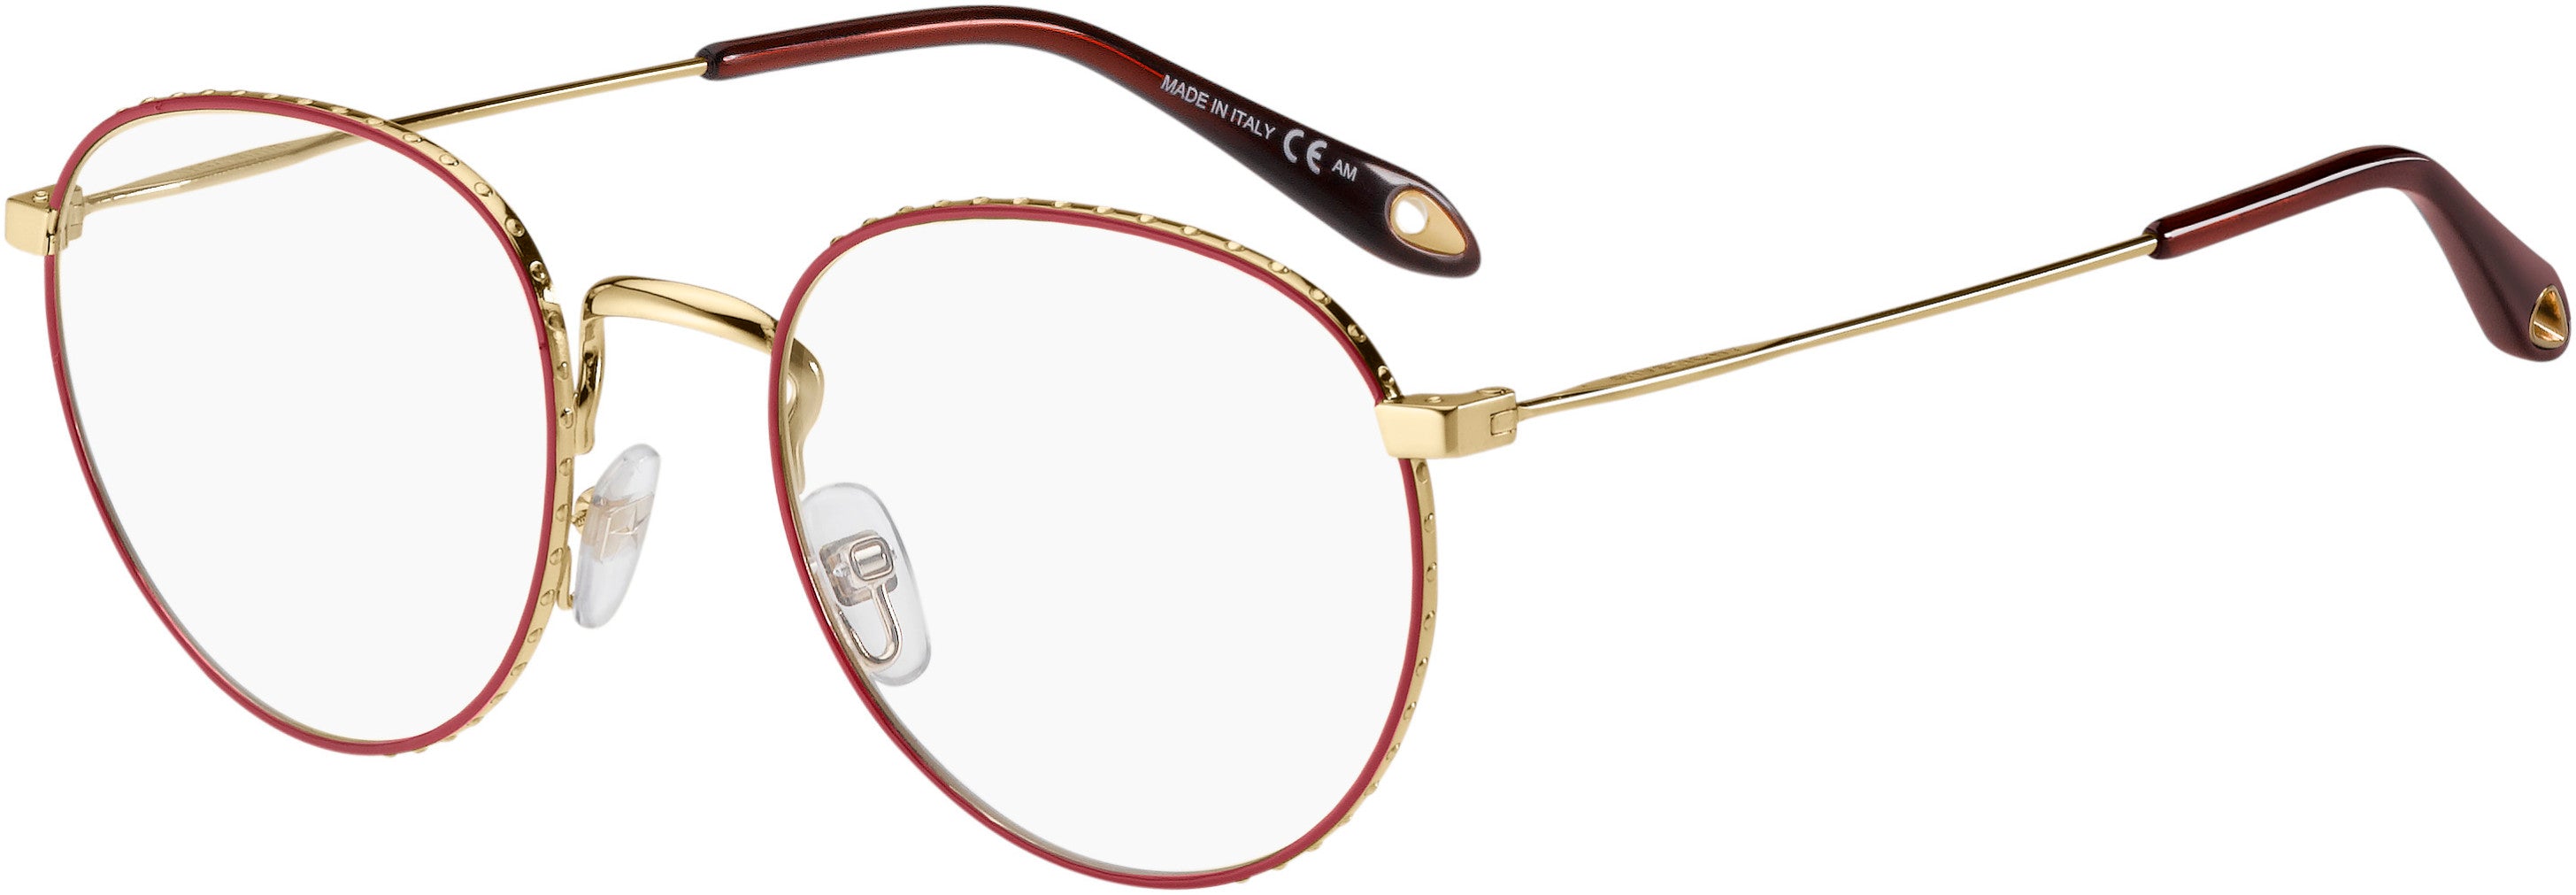  Givenchy 0072 Oval Modified Eyeglasses 0Y11-0Y11  Gold Red (00 Demo Lens)